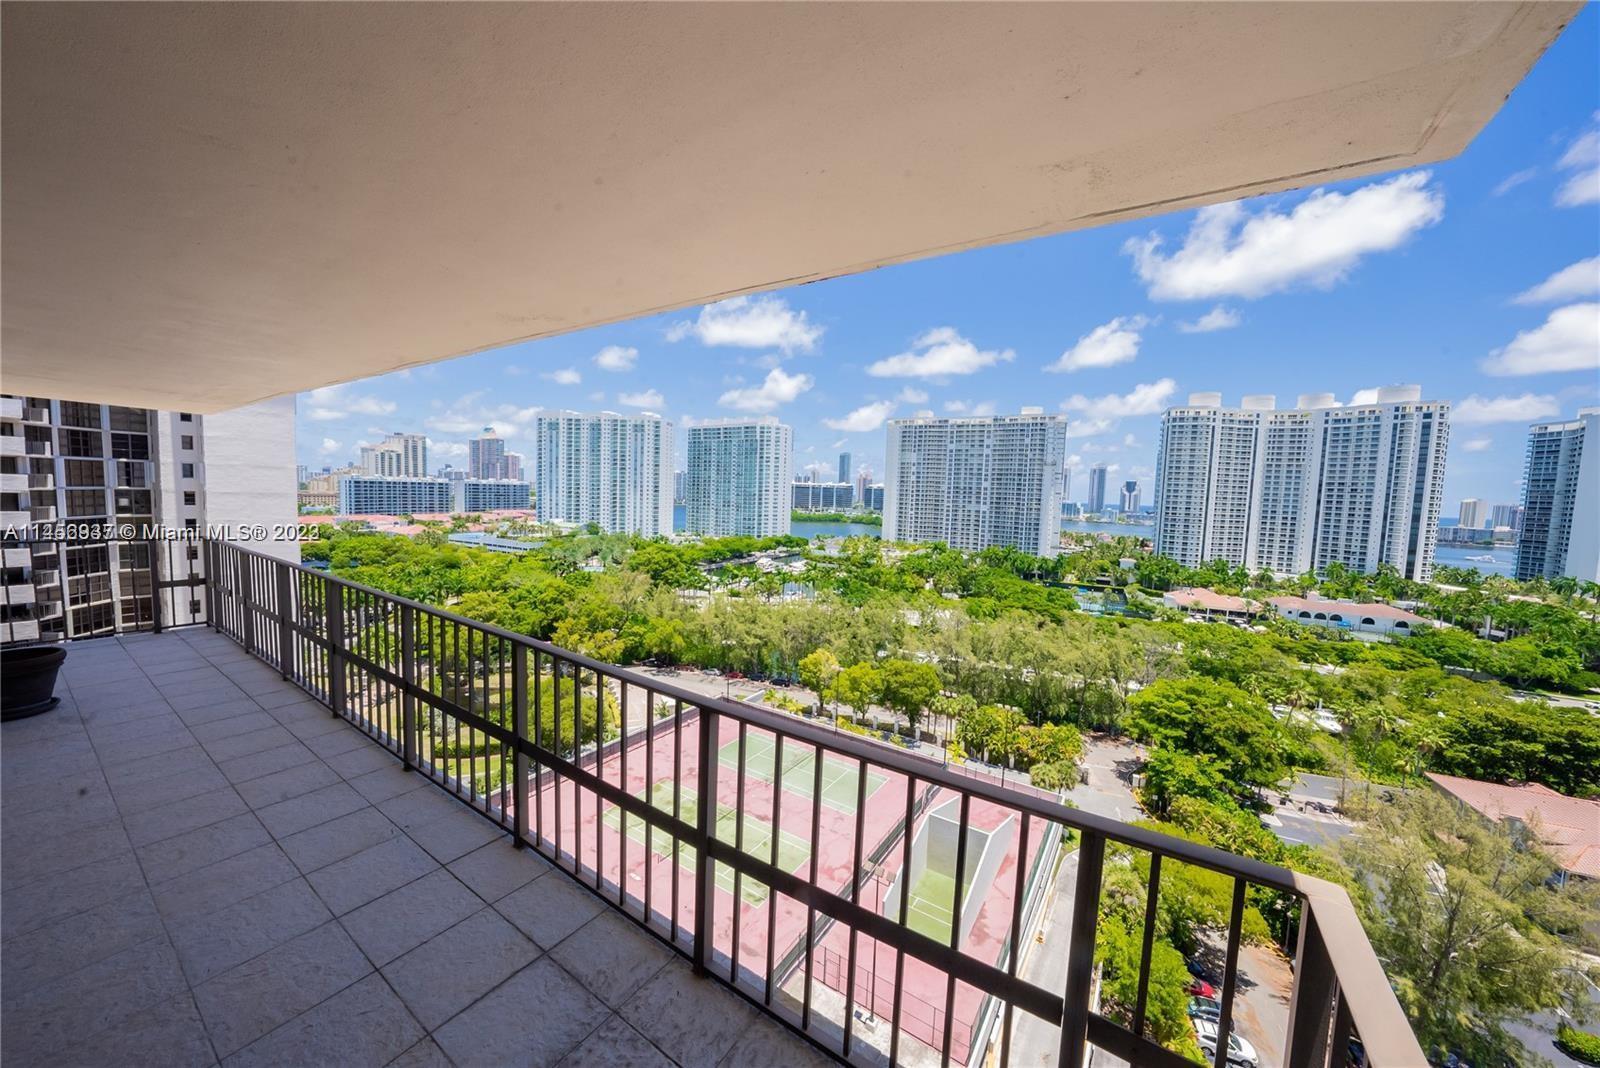 STUNNING OCEAN, INTRACOASTAL & LAKE VIEWS FROM THIS COMPLETELY REMODELED 2 BED+DEN (EASILY CONVERT I